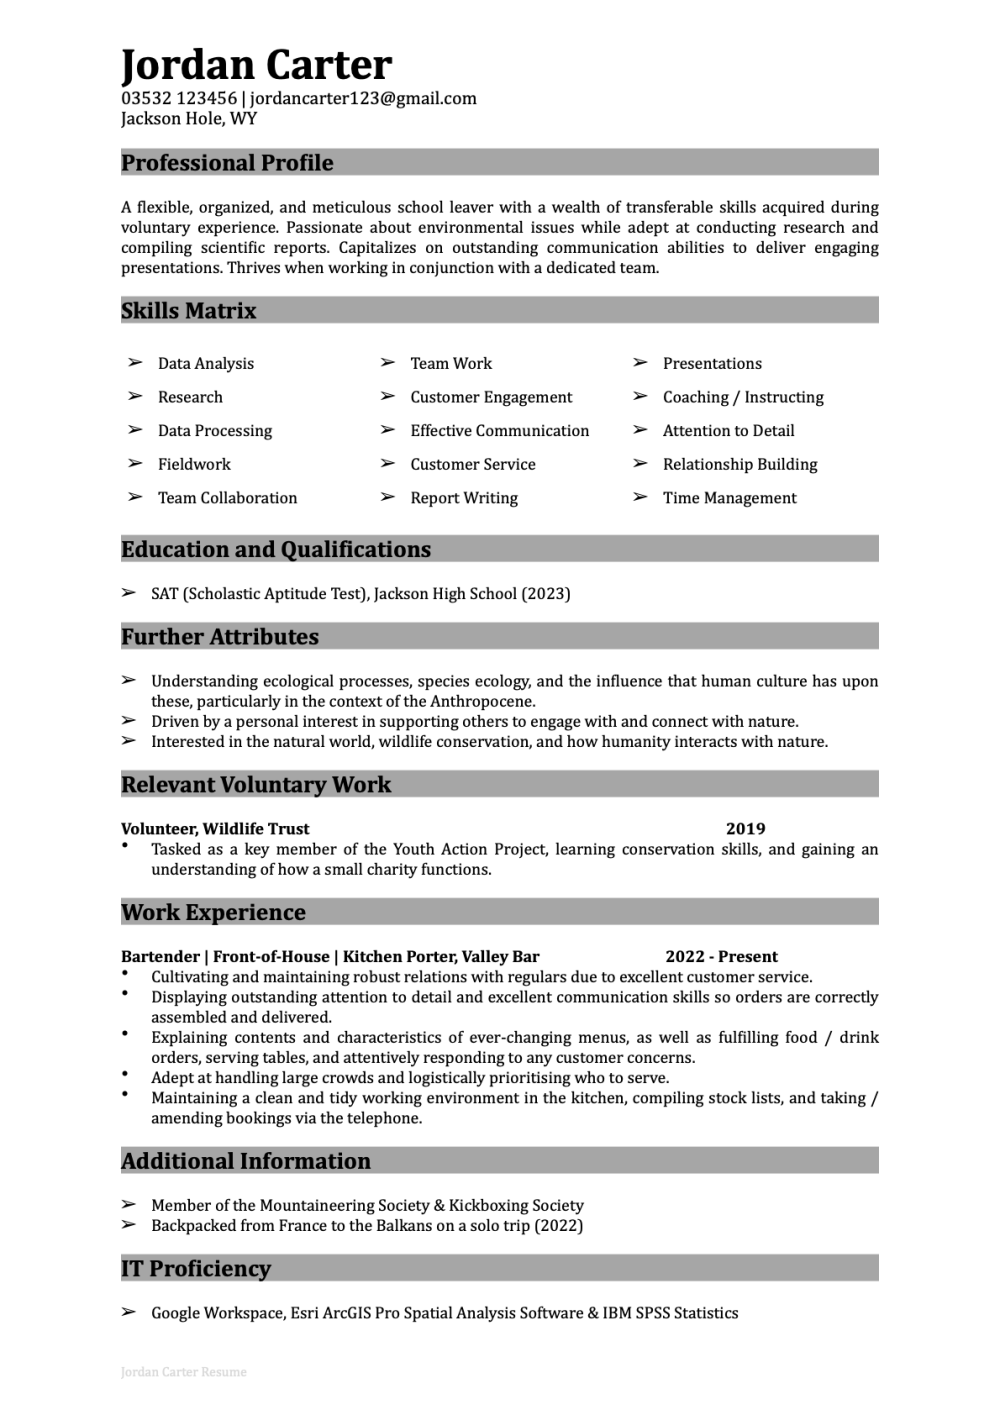 sample resume without experience